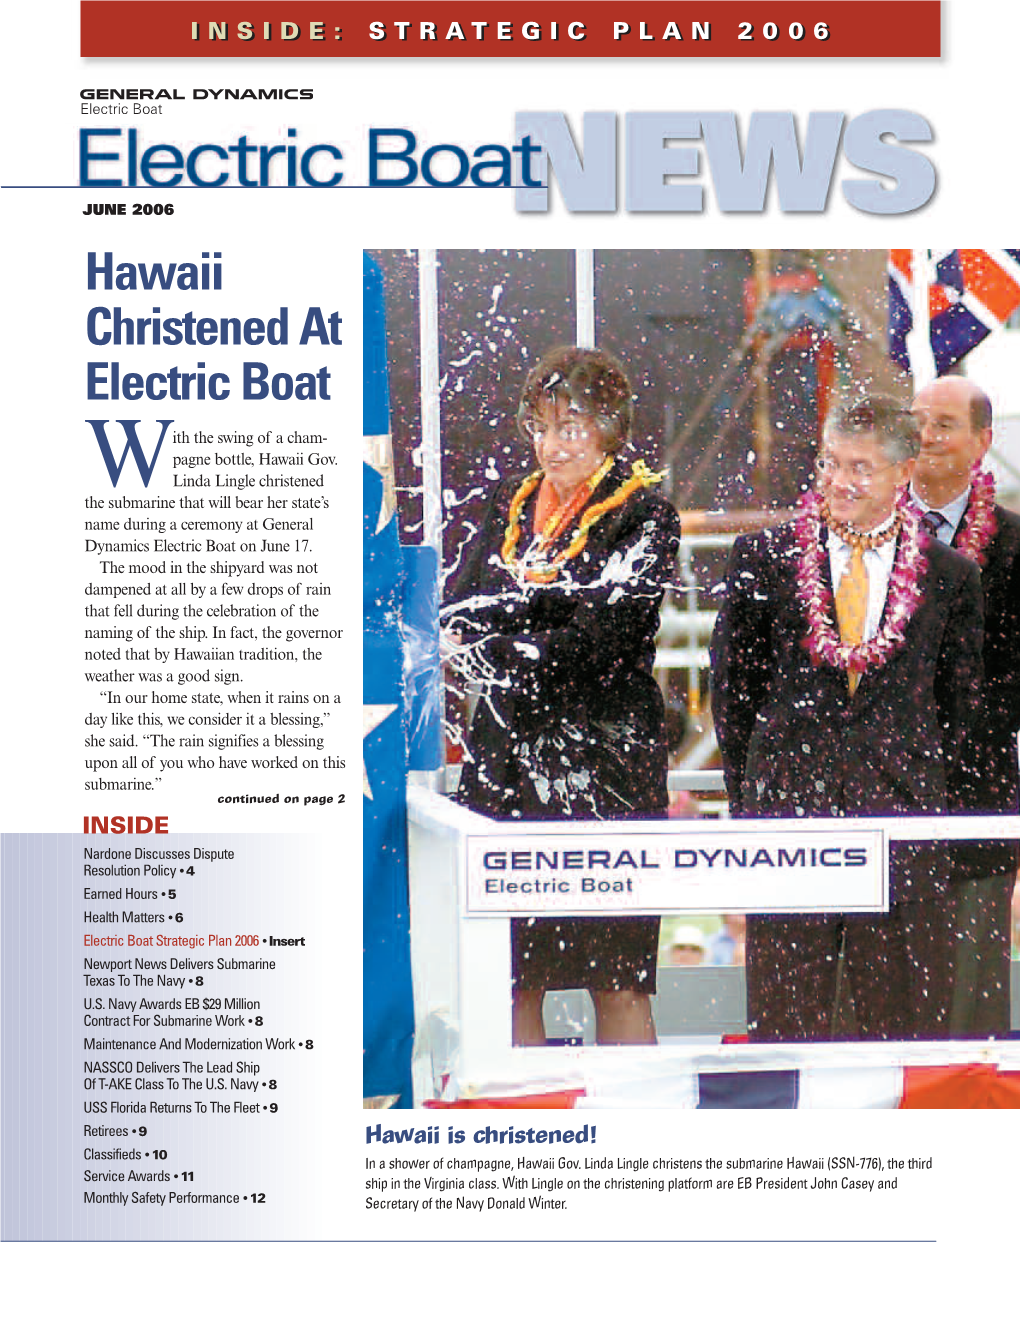 Hawaii Christened at Electric Boat